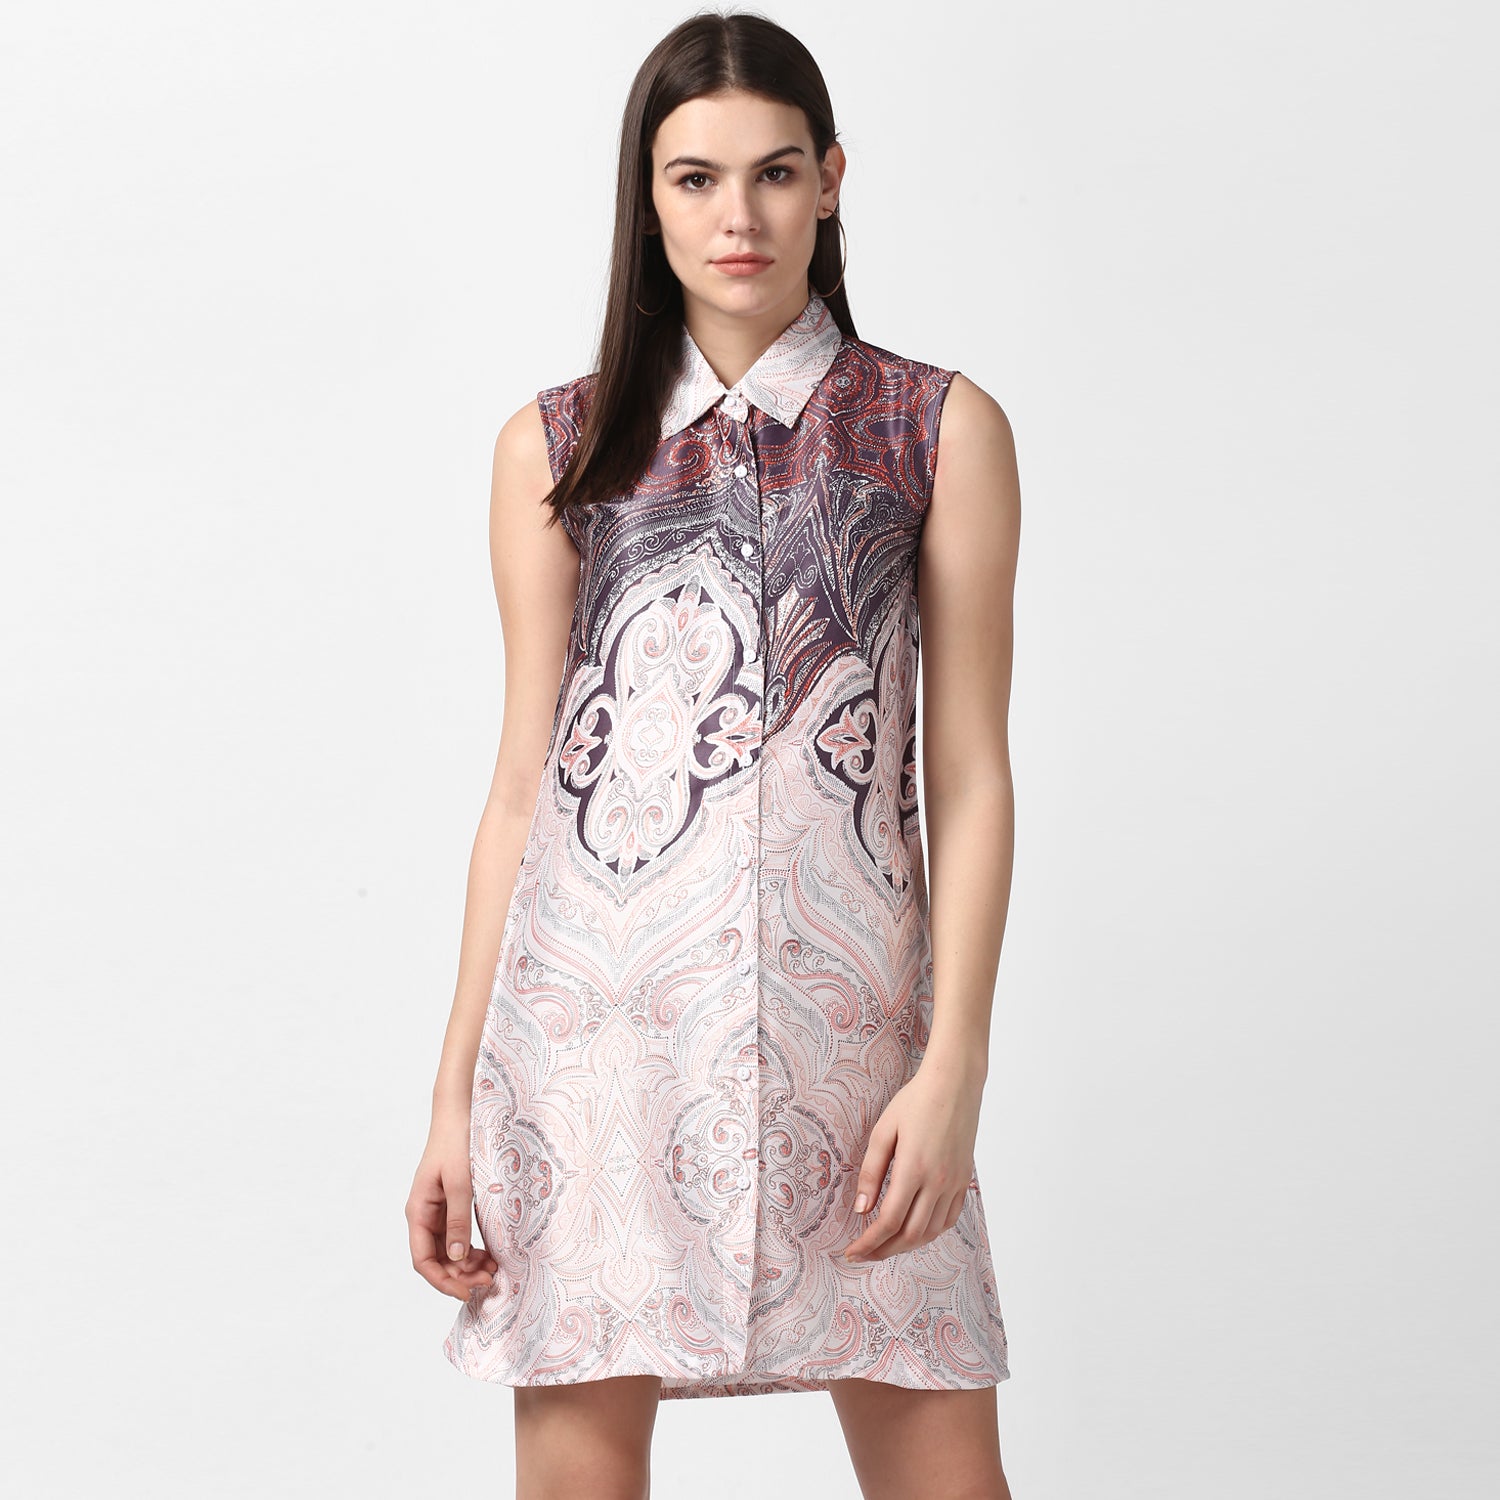 Women's Satin Printed Dress with front Buttons - StyleStone